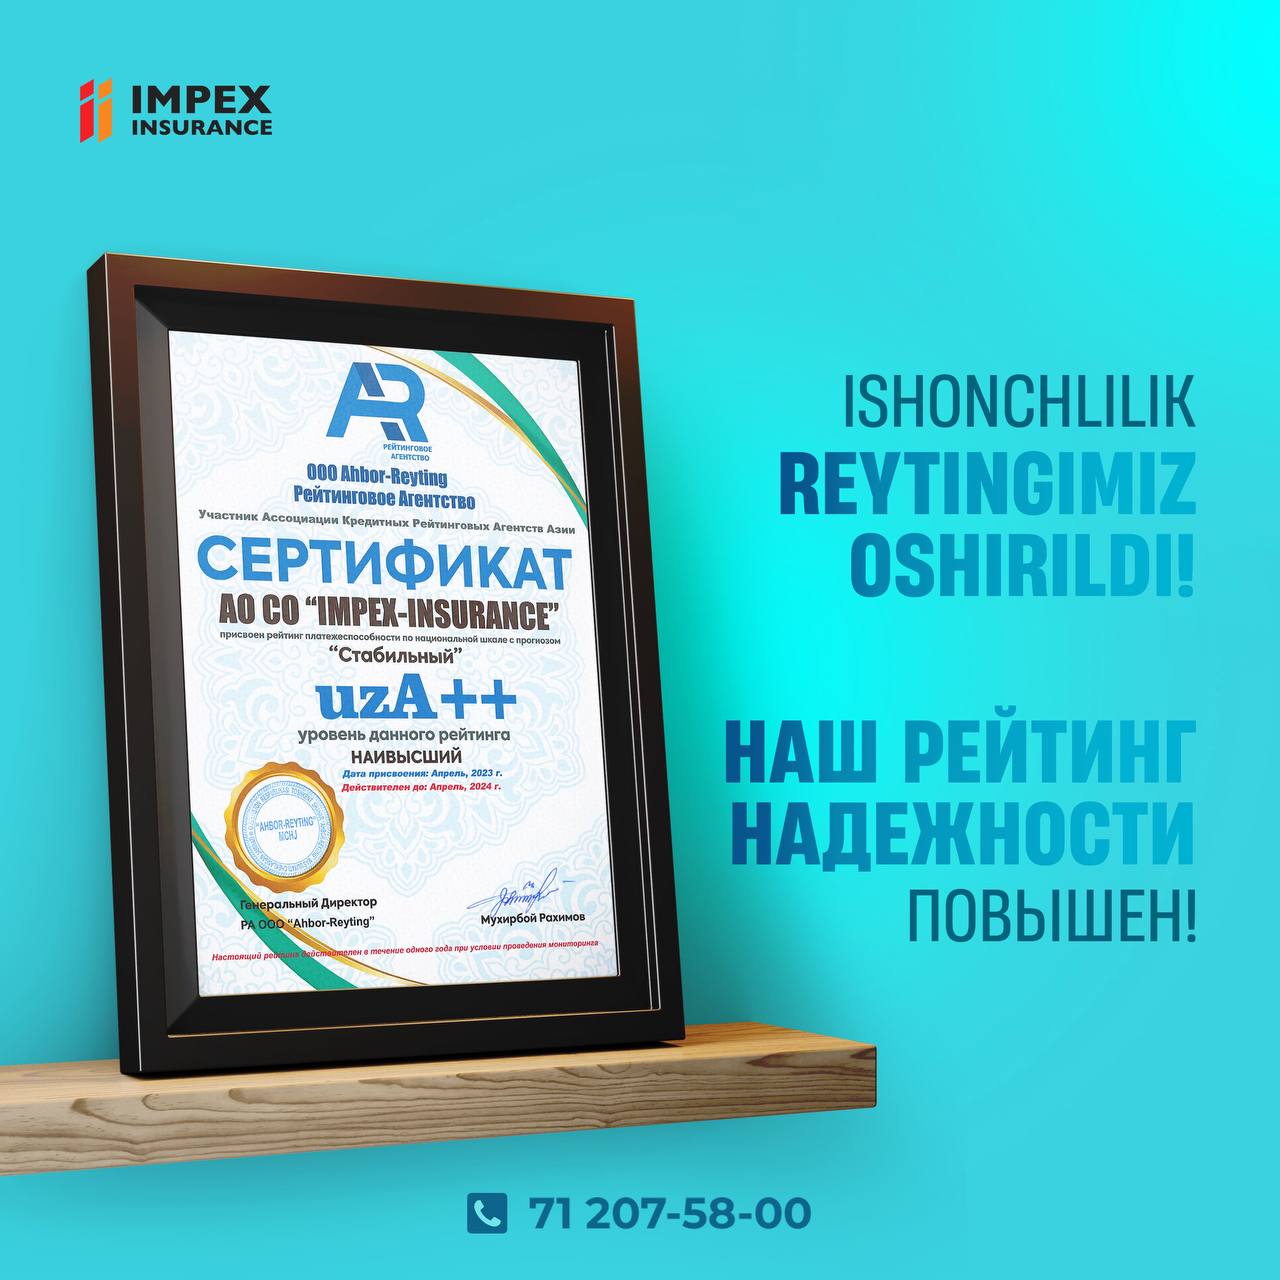 Impex Insurance company was awarded the rating "UzA++"